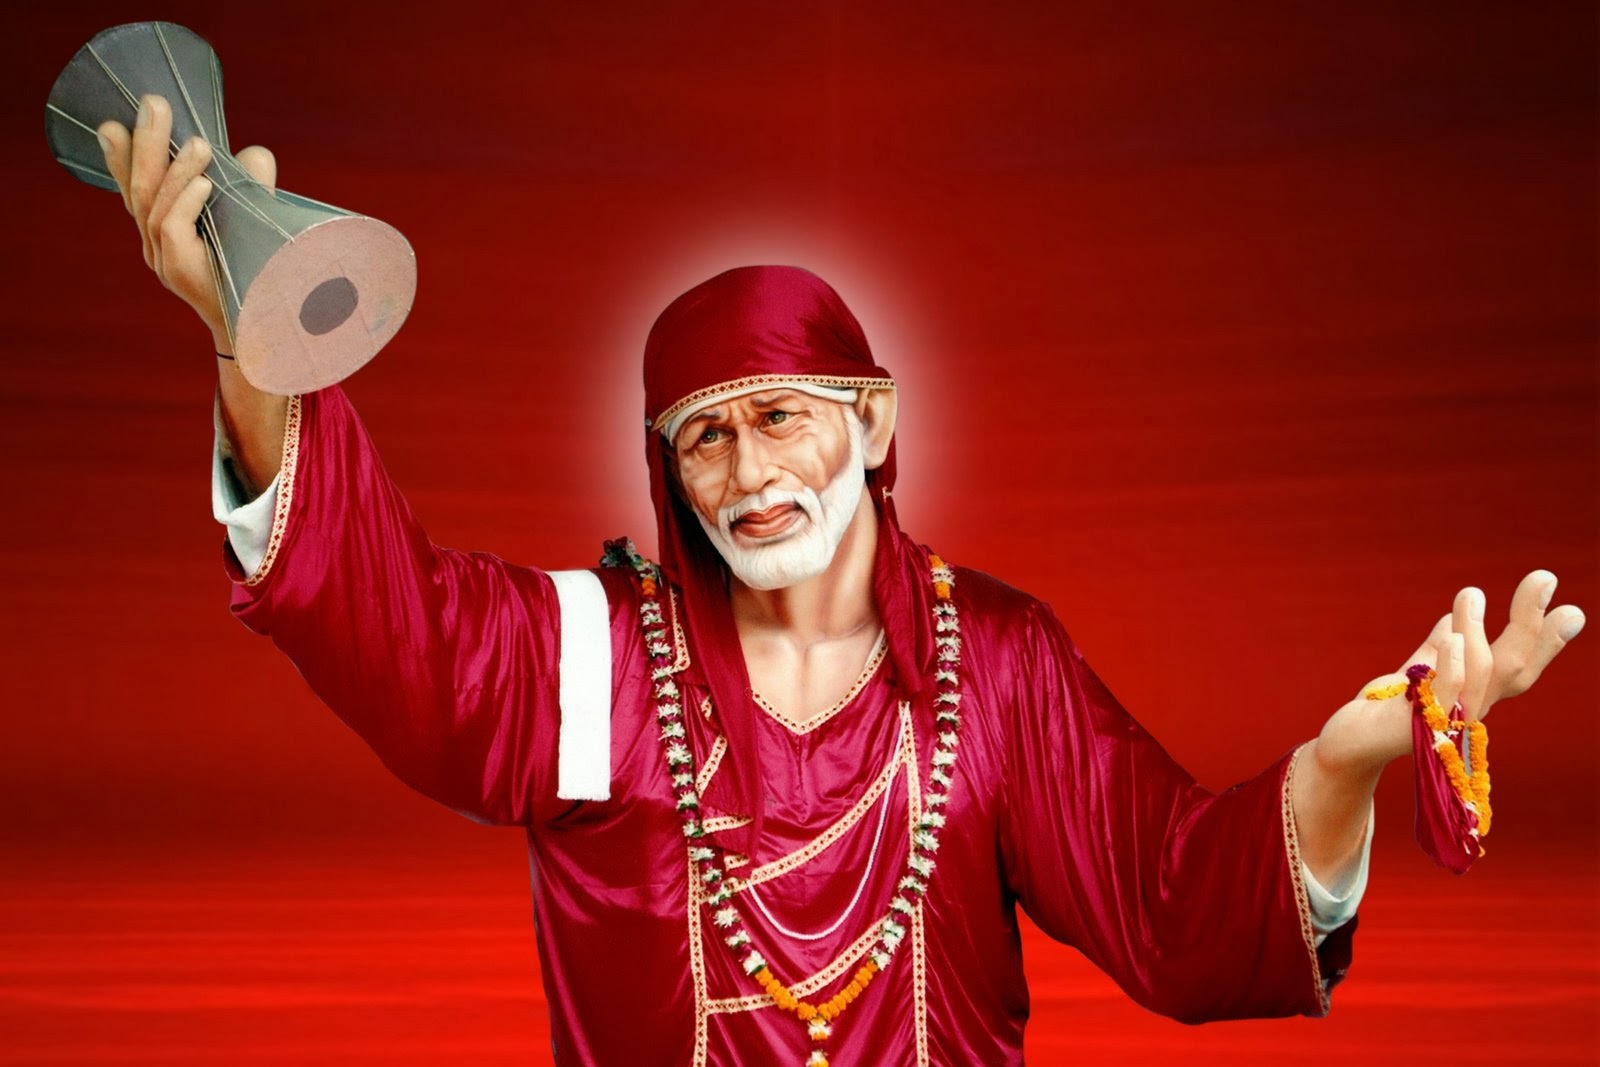 baba wallpaper,performance,talent show,gesture